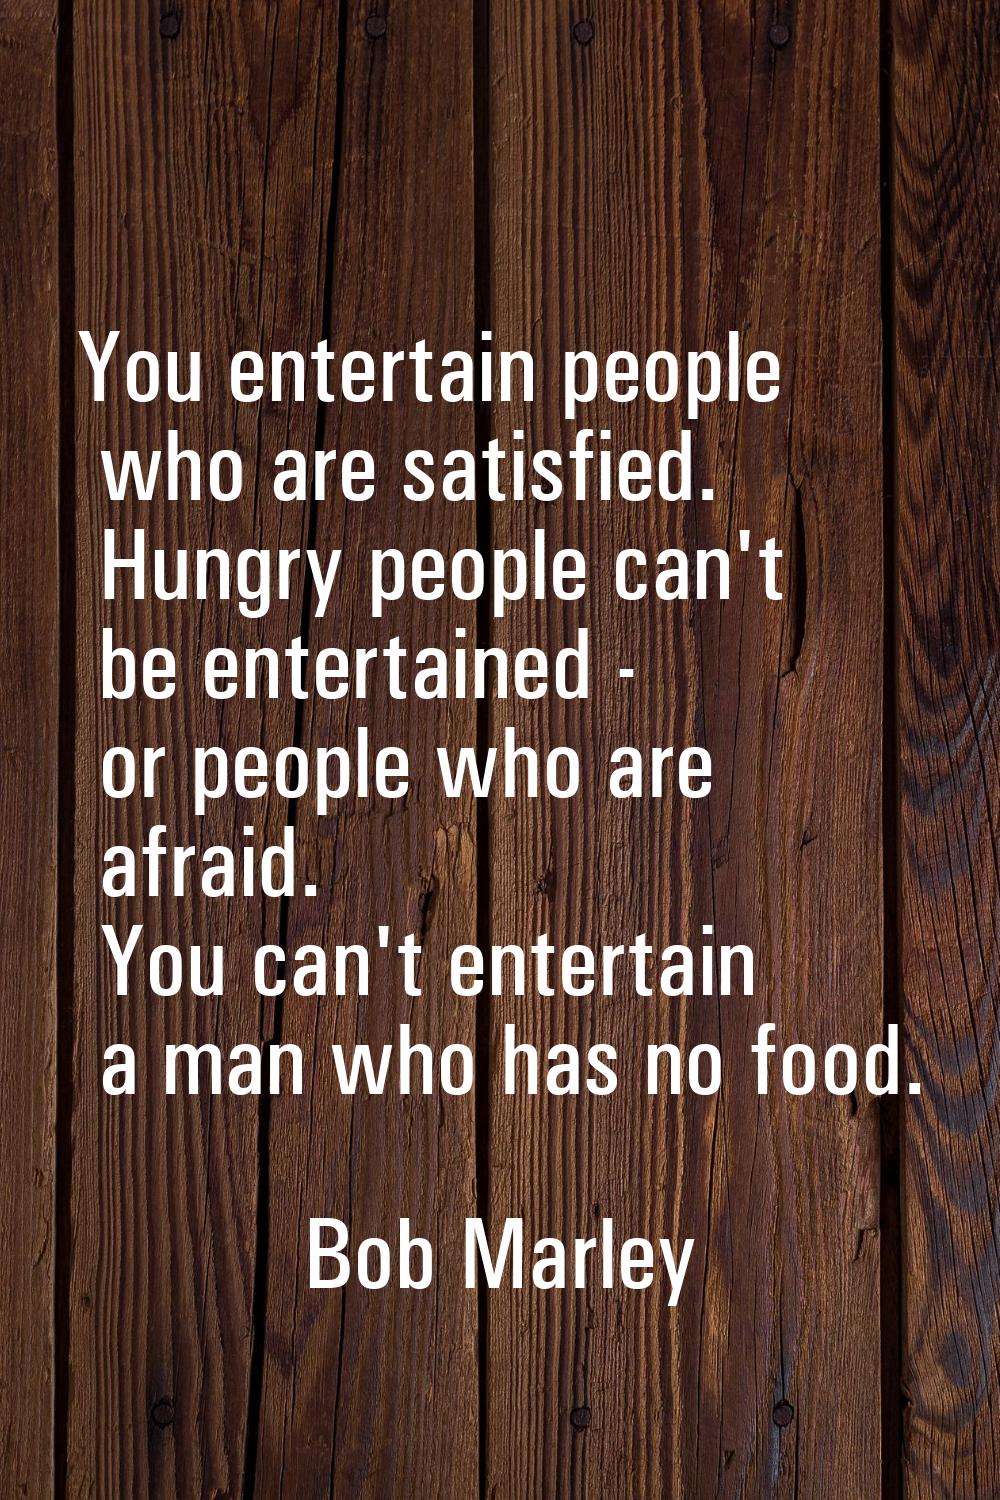 You entertain people who are satisfied. Hungry people can't be entertained - or people who are afra